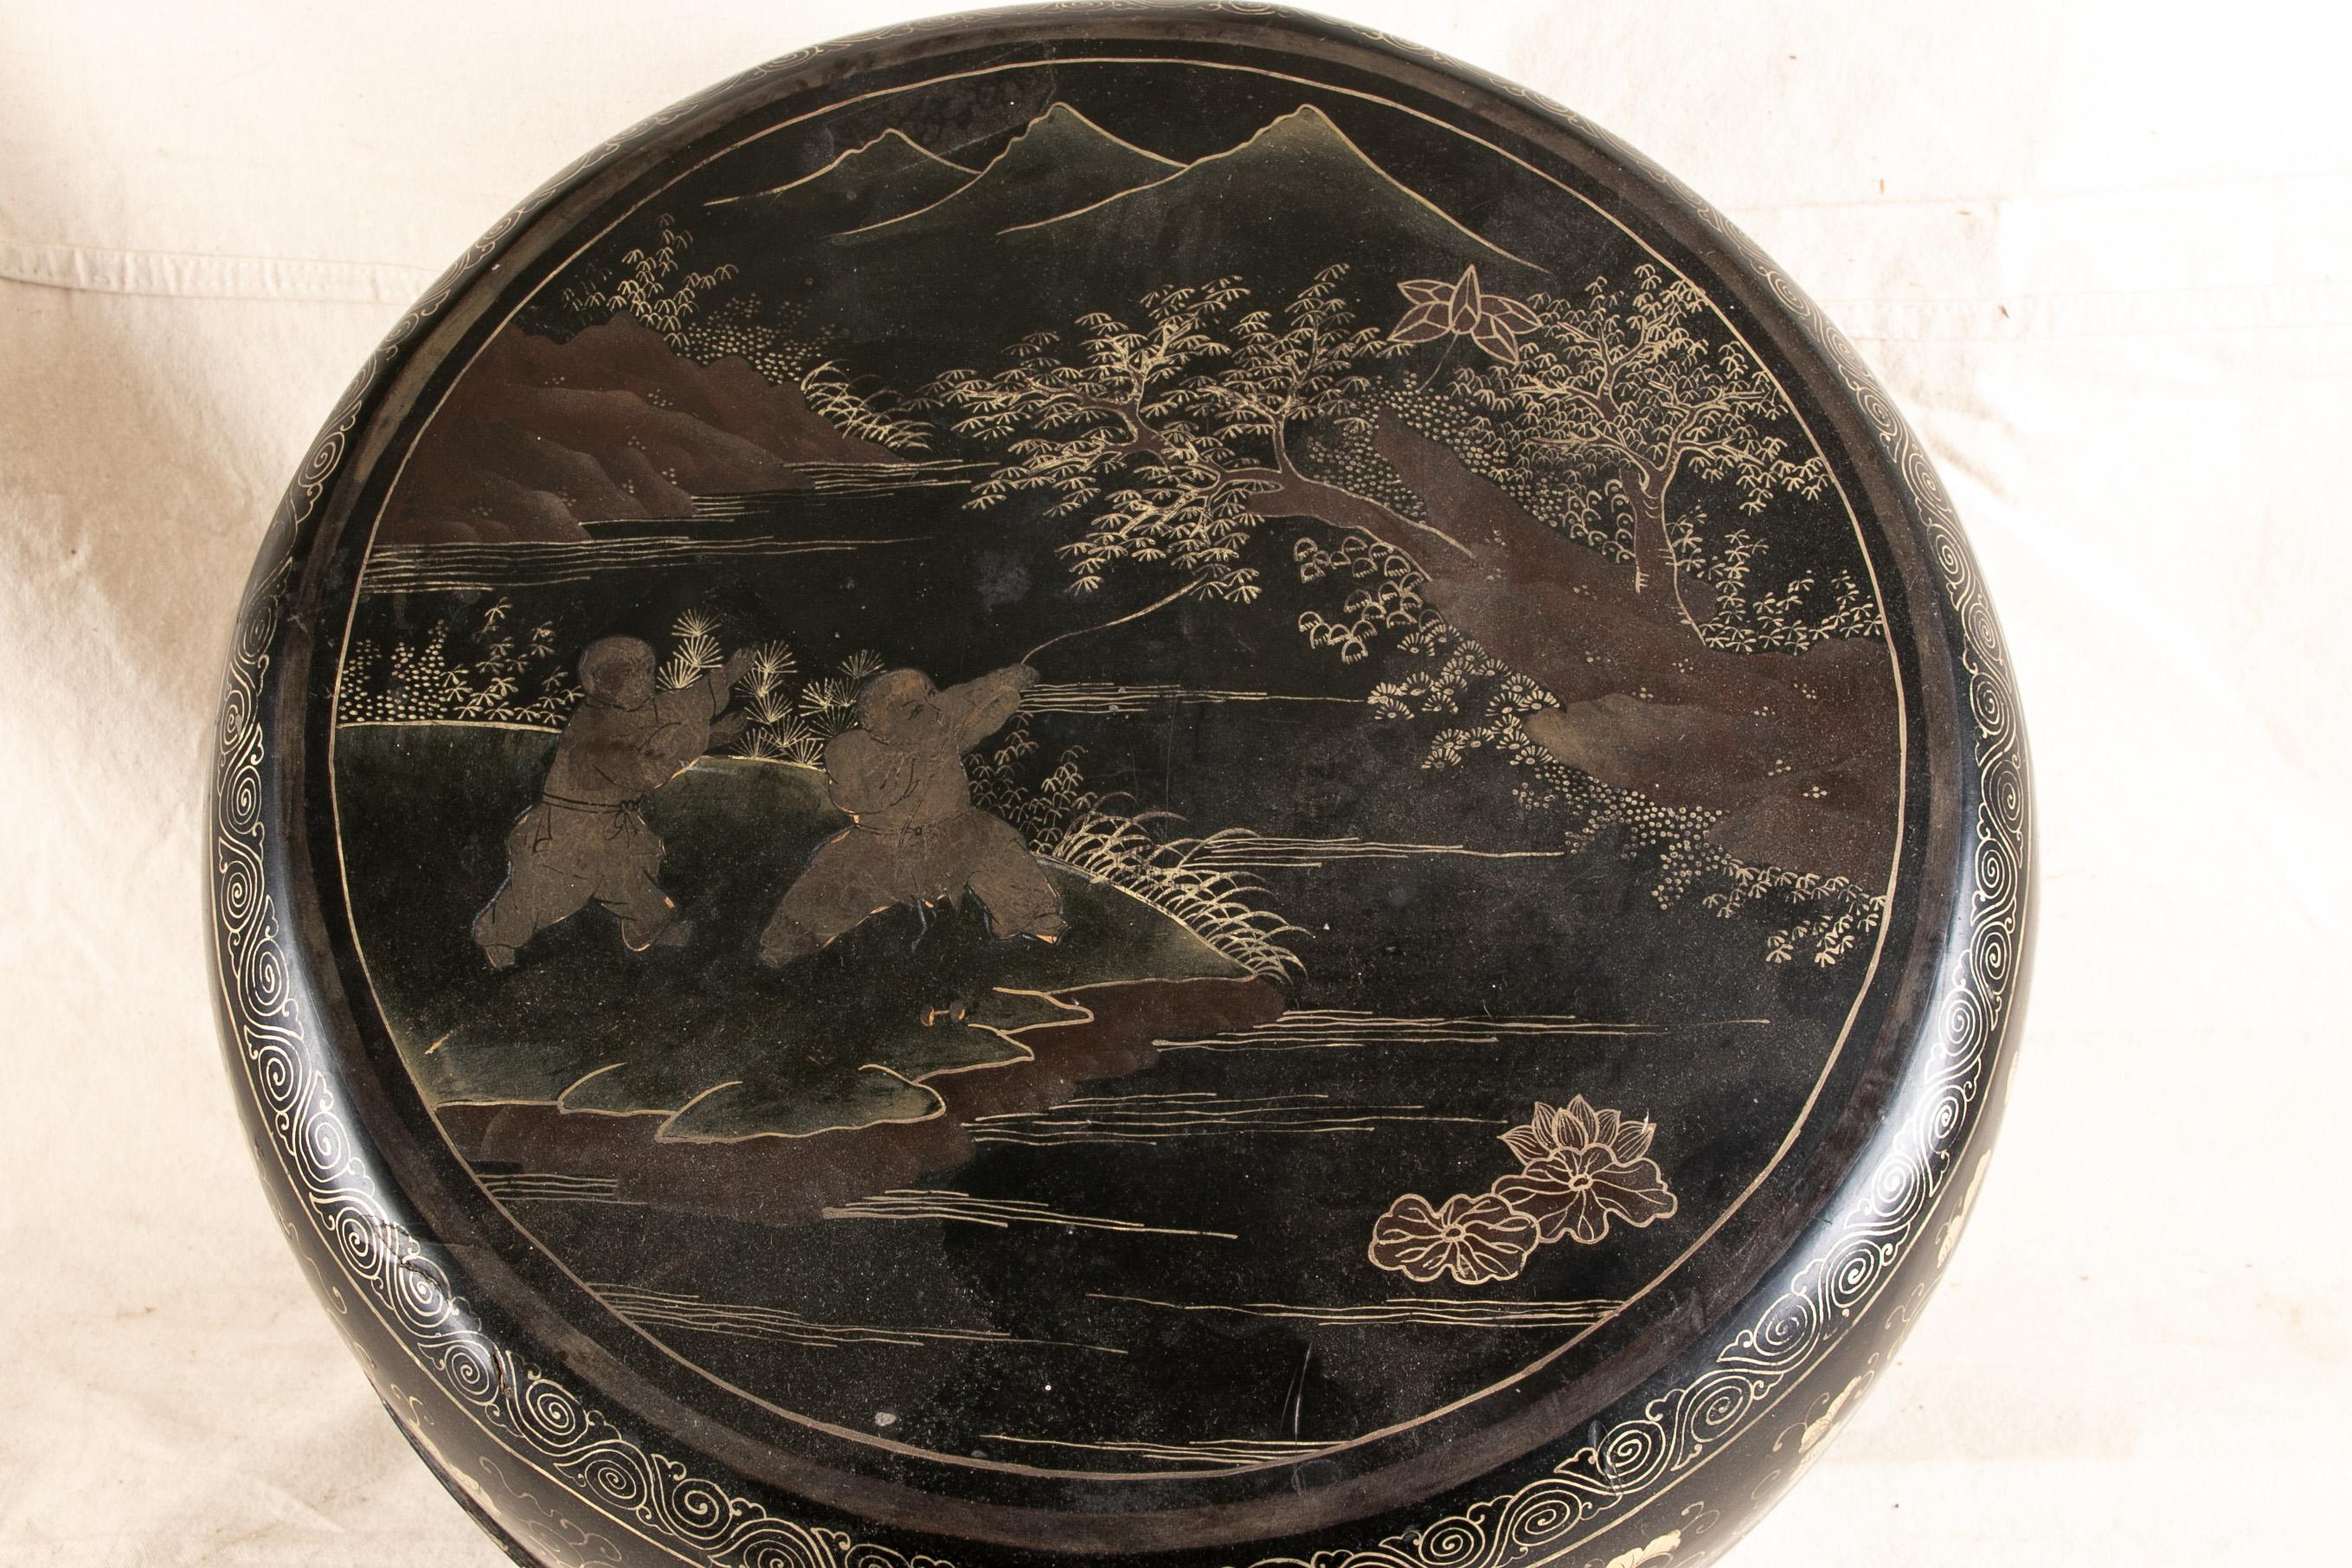 20th Century Large Antique Asian Lacquered and Decorated Box